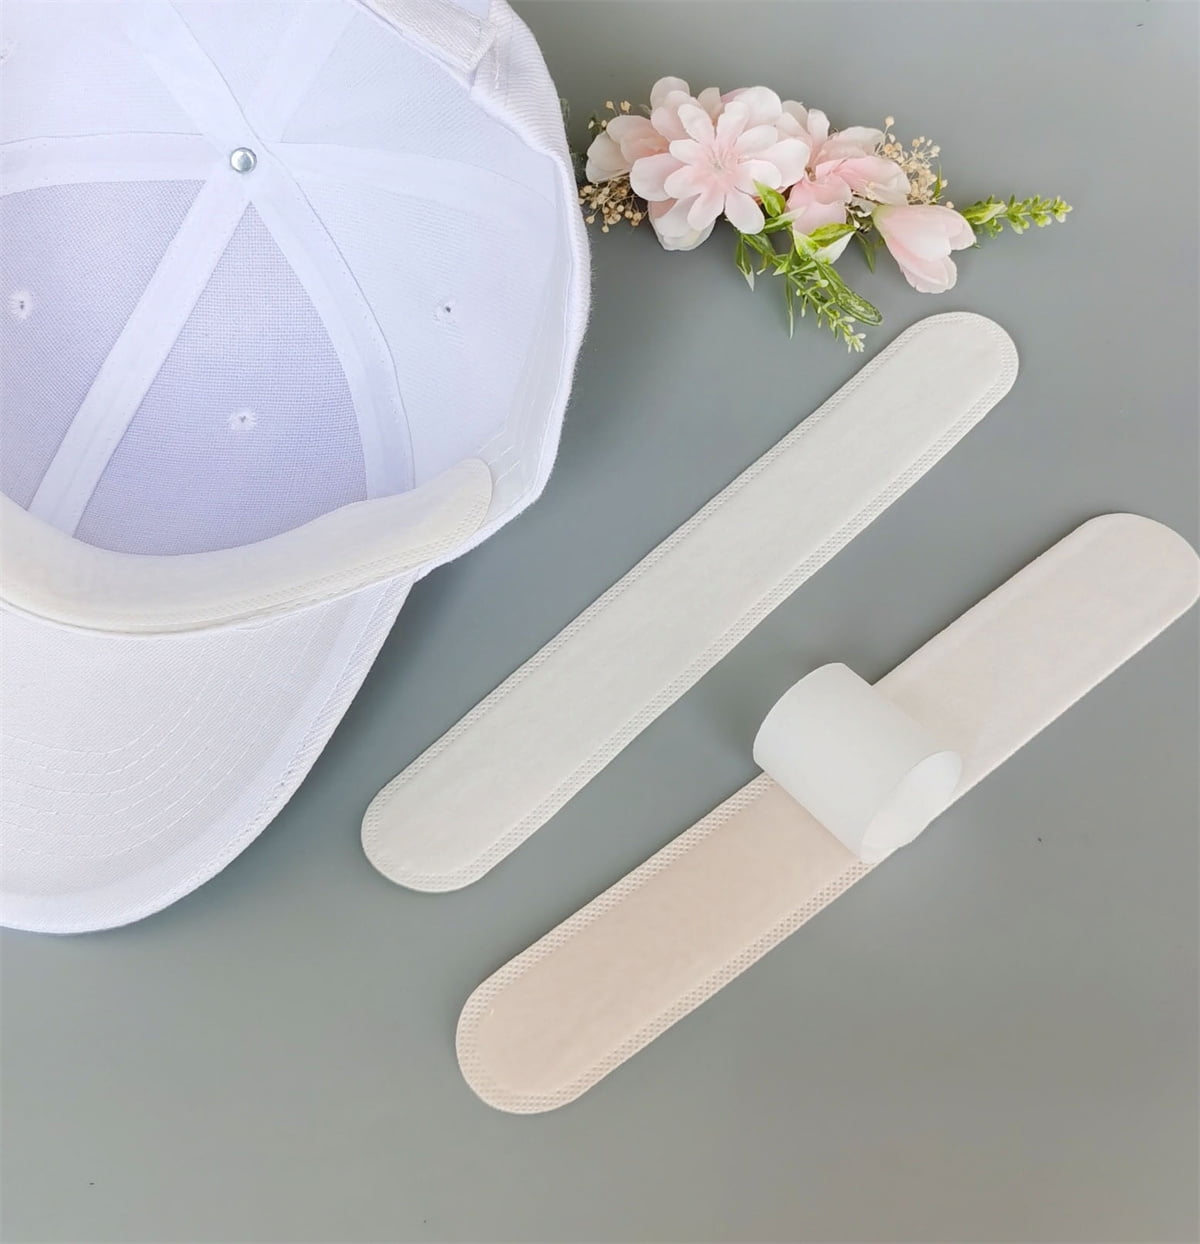 Gejoy Golf Hat Liner Cap Absorbent Sweat Pad for Baseball White